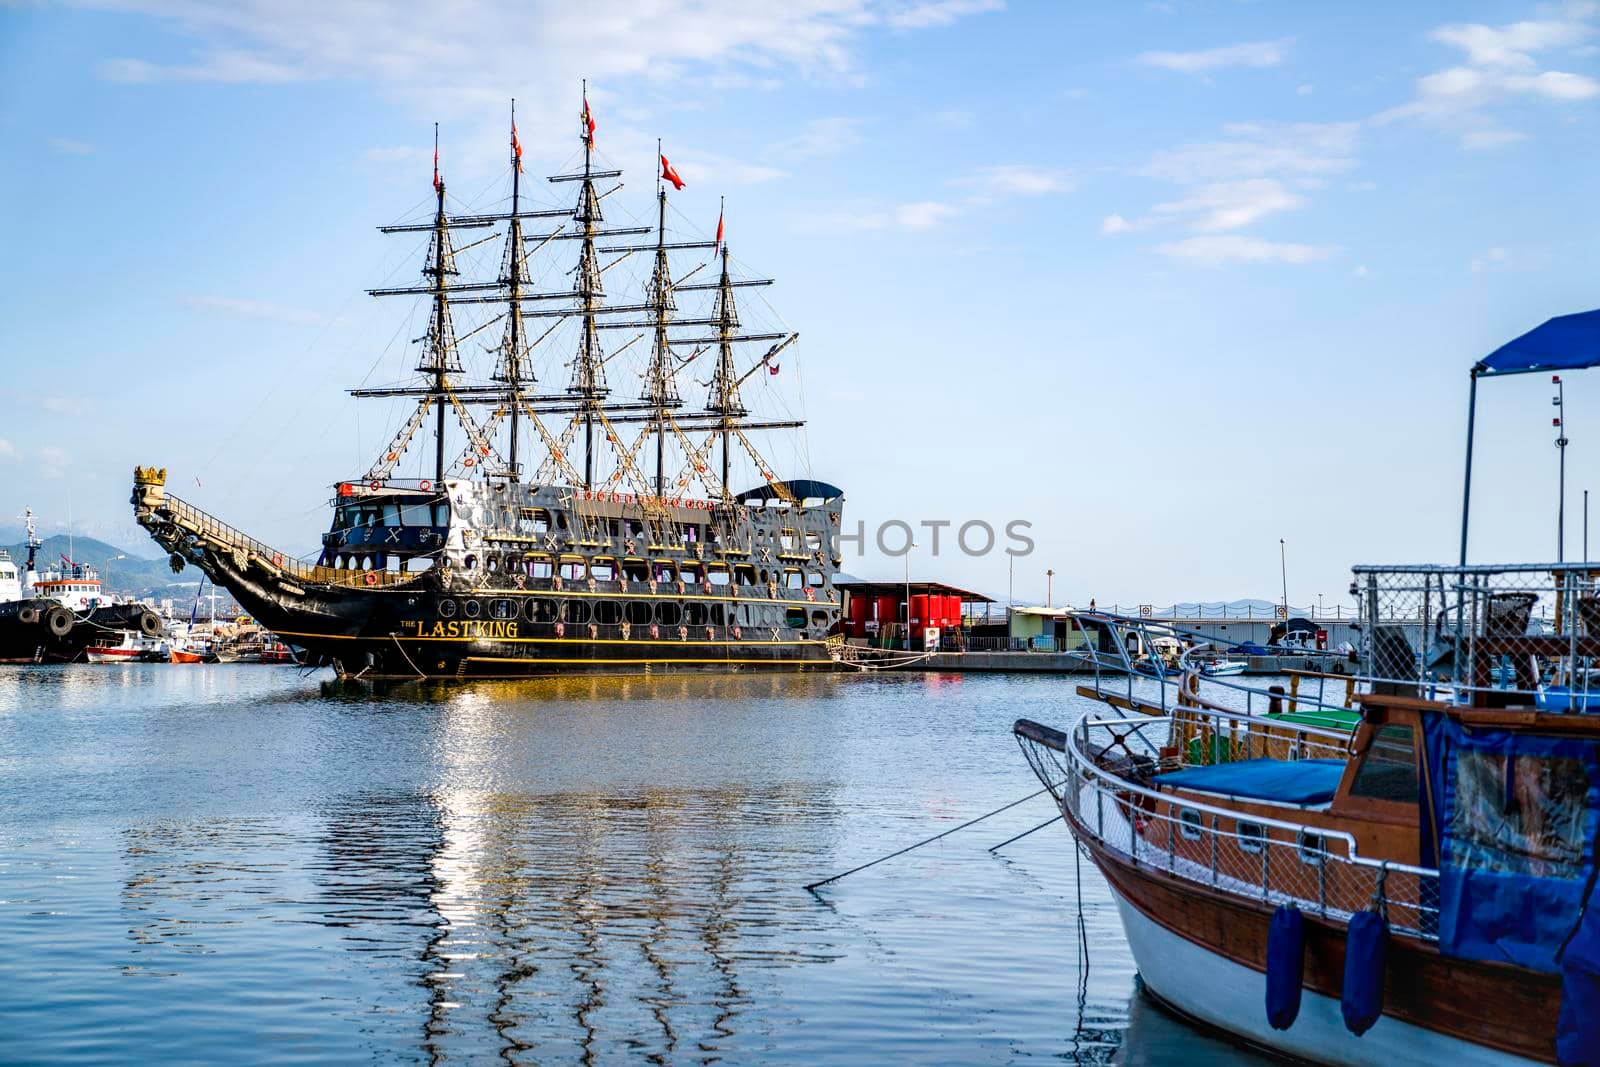 Turkey, Alanya - November 9, 2020: An old pirate ship is moored in the bay of Alanya. Bay of ships.